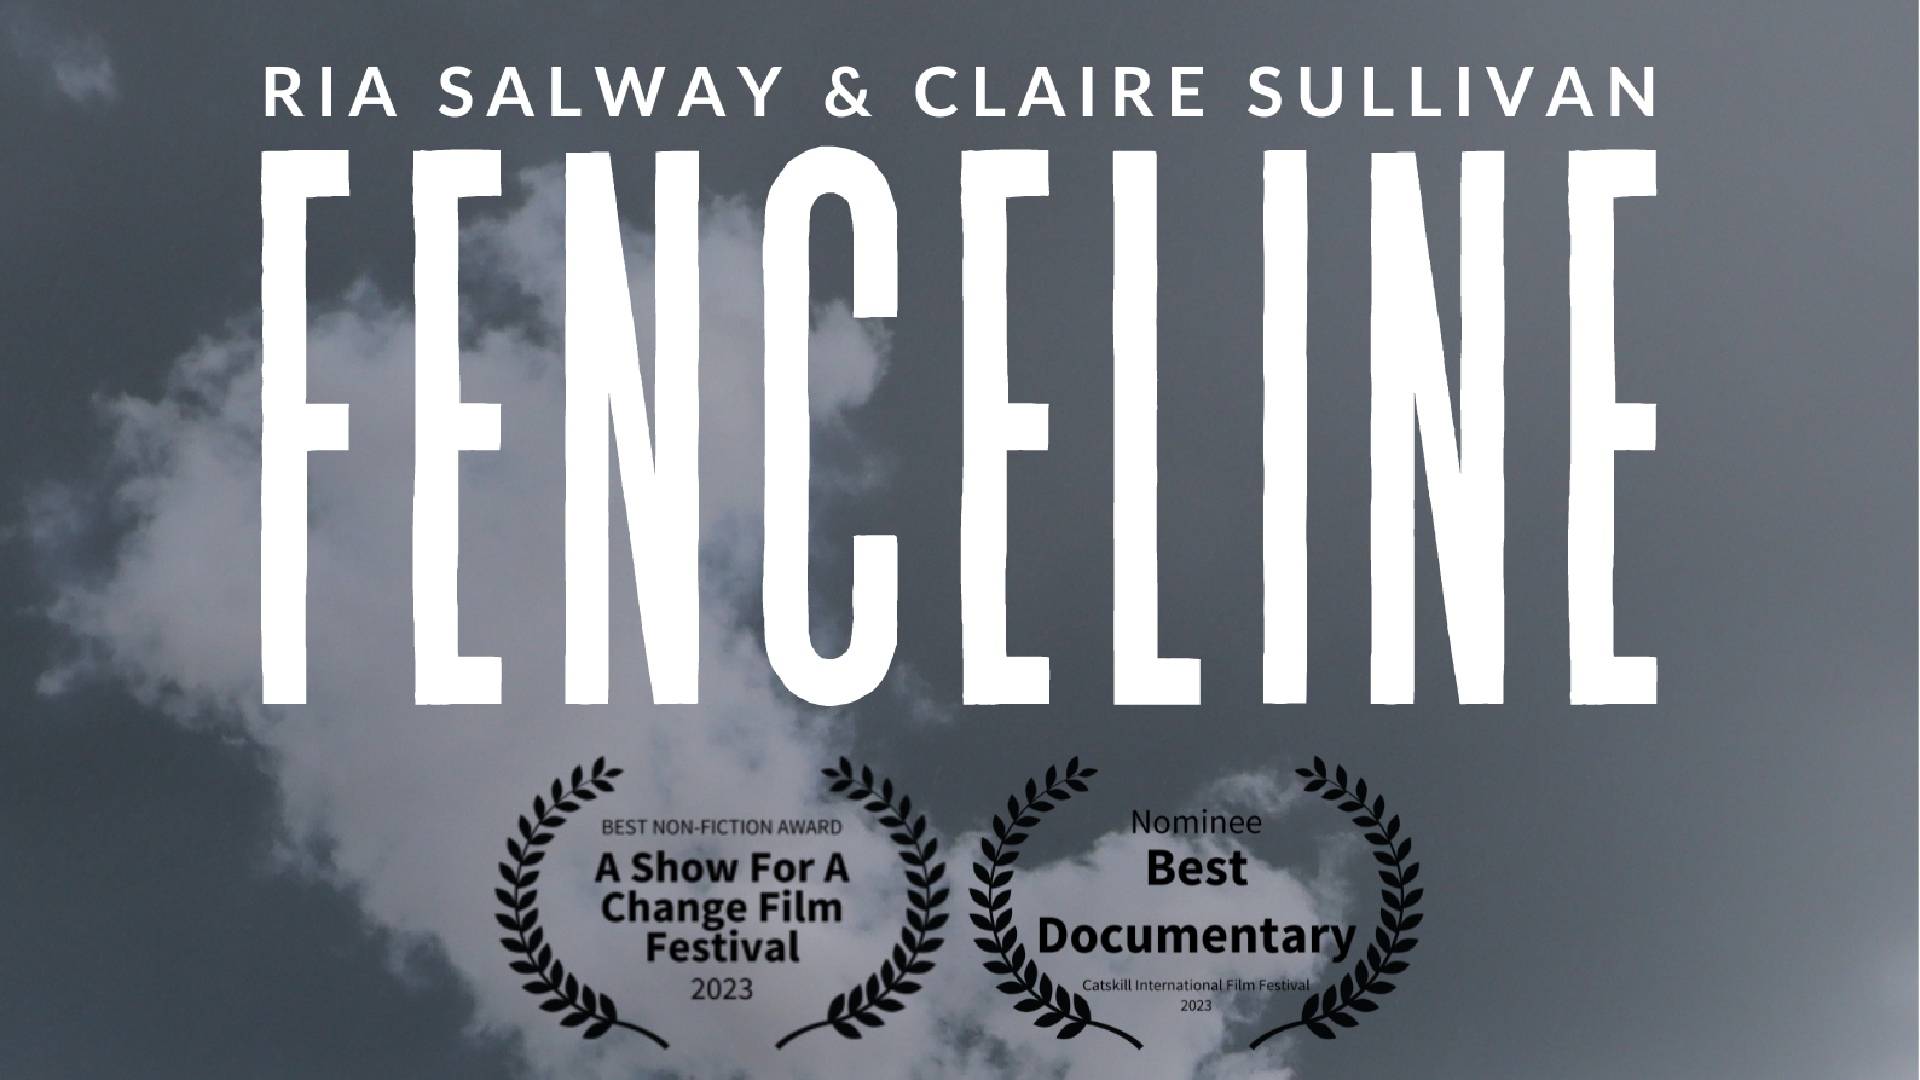 Cover for the Fenceline documentary, featuring accolades and the names of the creators.